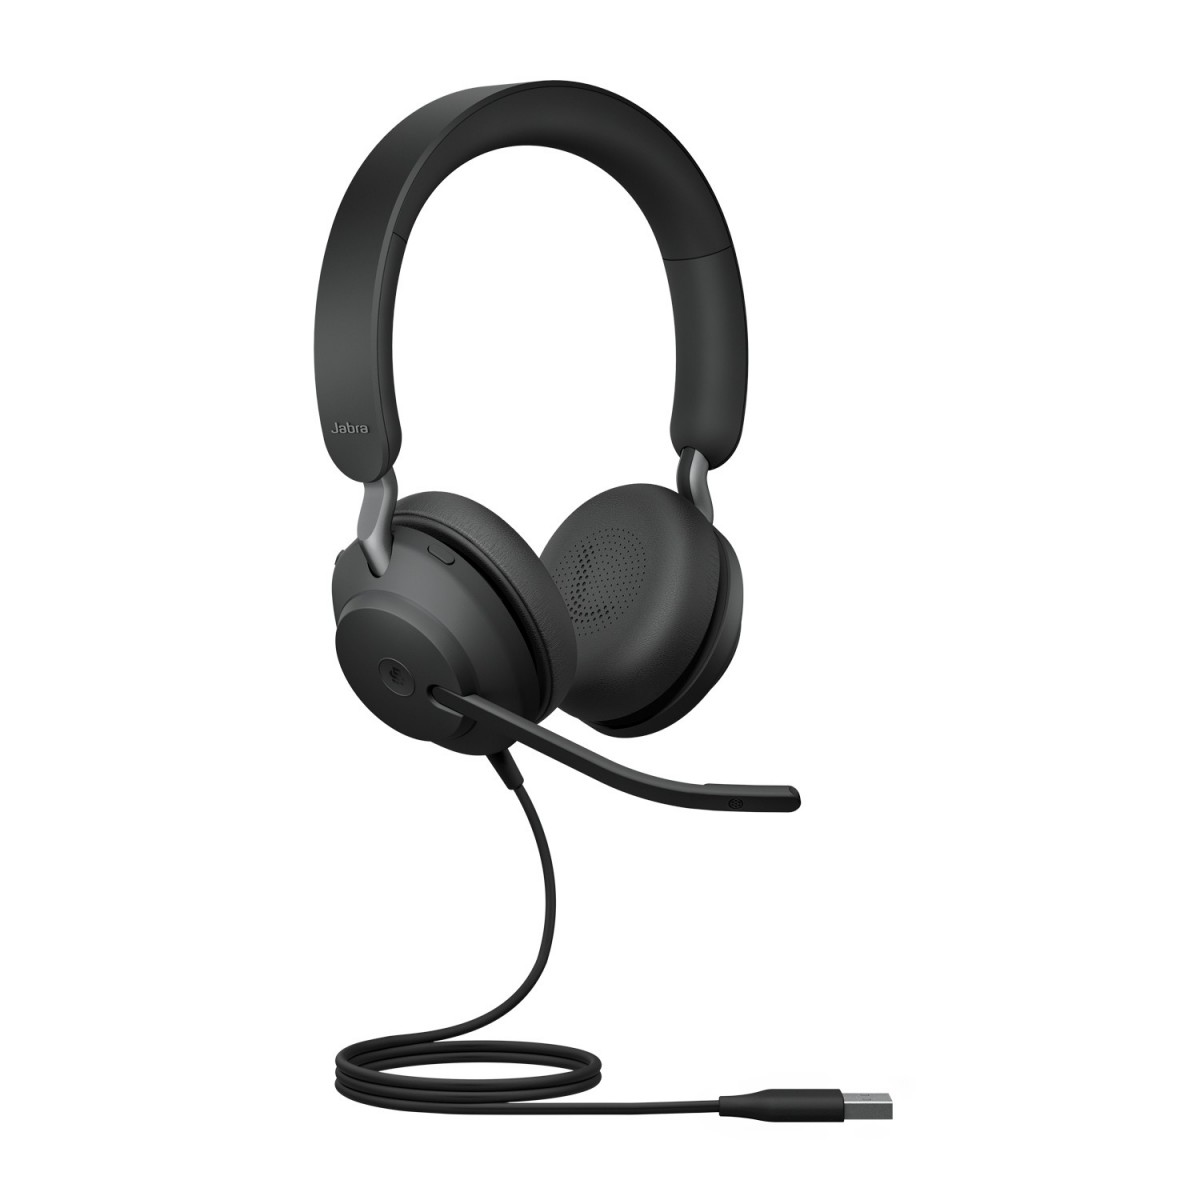 Jabra Evolve2 40 - MS Stereo - Headset - Head-band - Office/Call center - Black - Binaural - Play/Pause - Track < - Track > - Vo